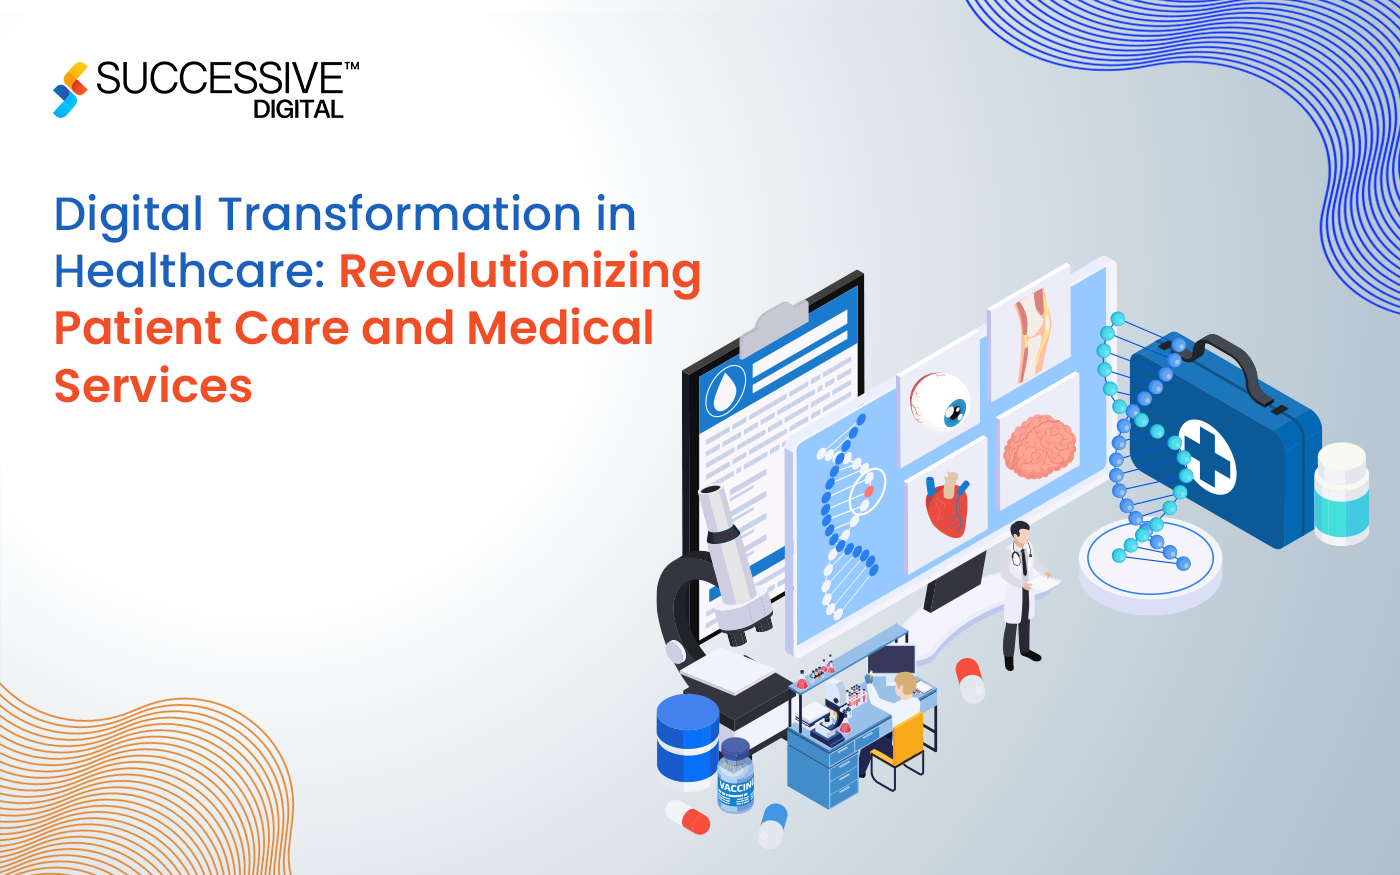 Digital Transformation in Healthcare: Revolutionizing Patient Care and Medical Services